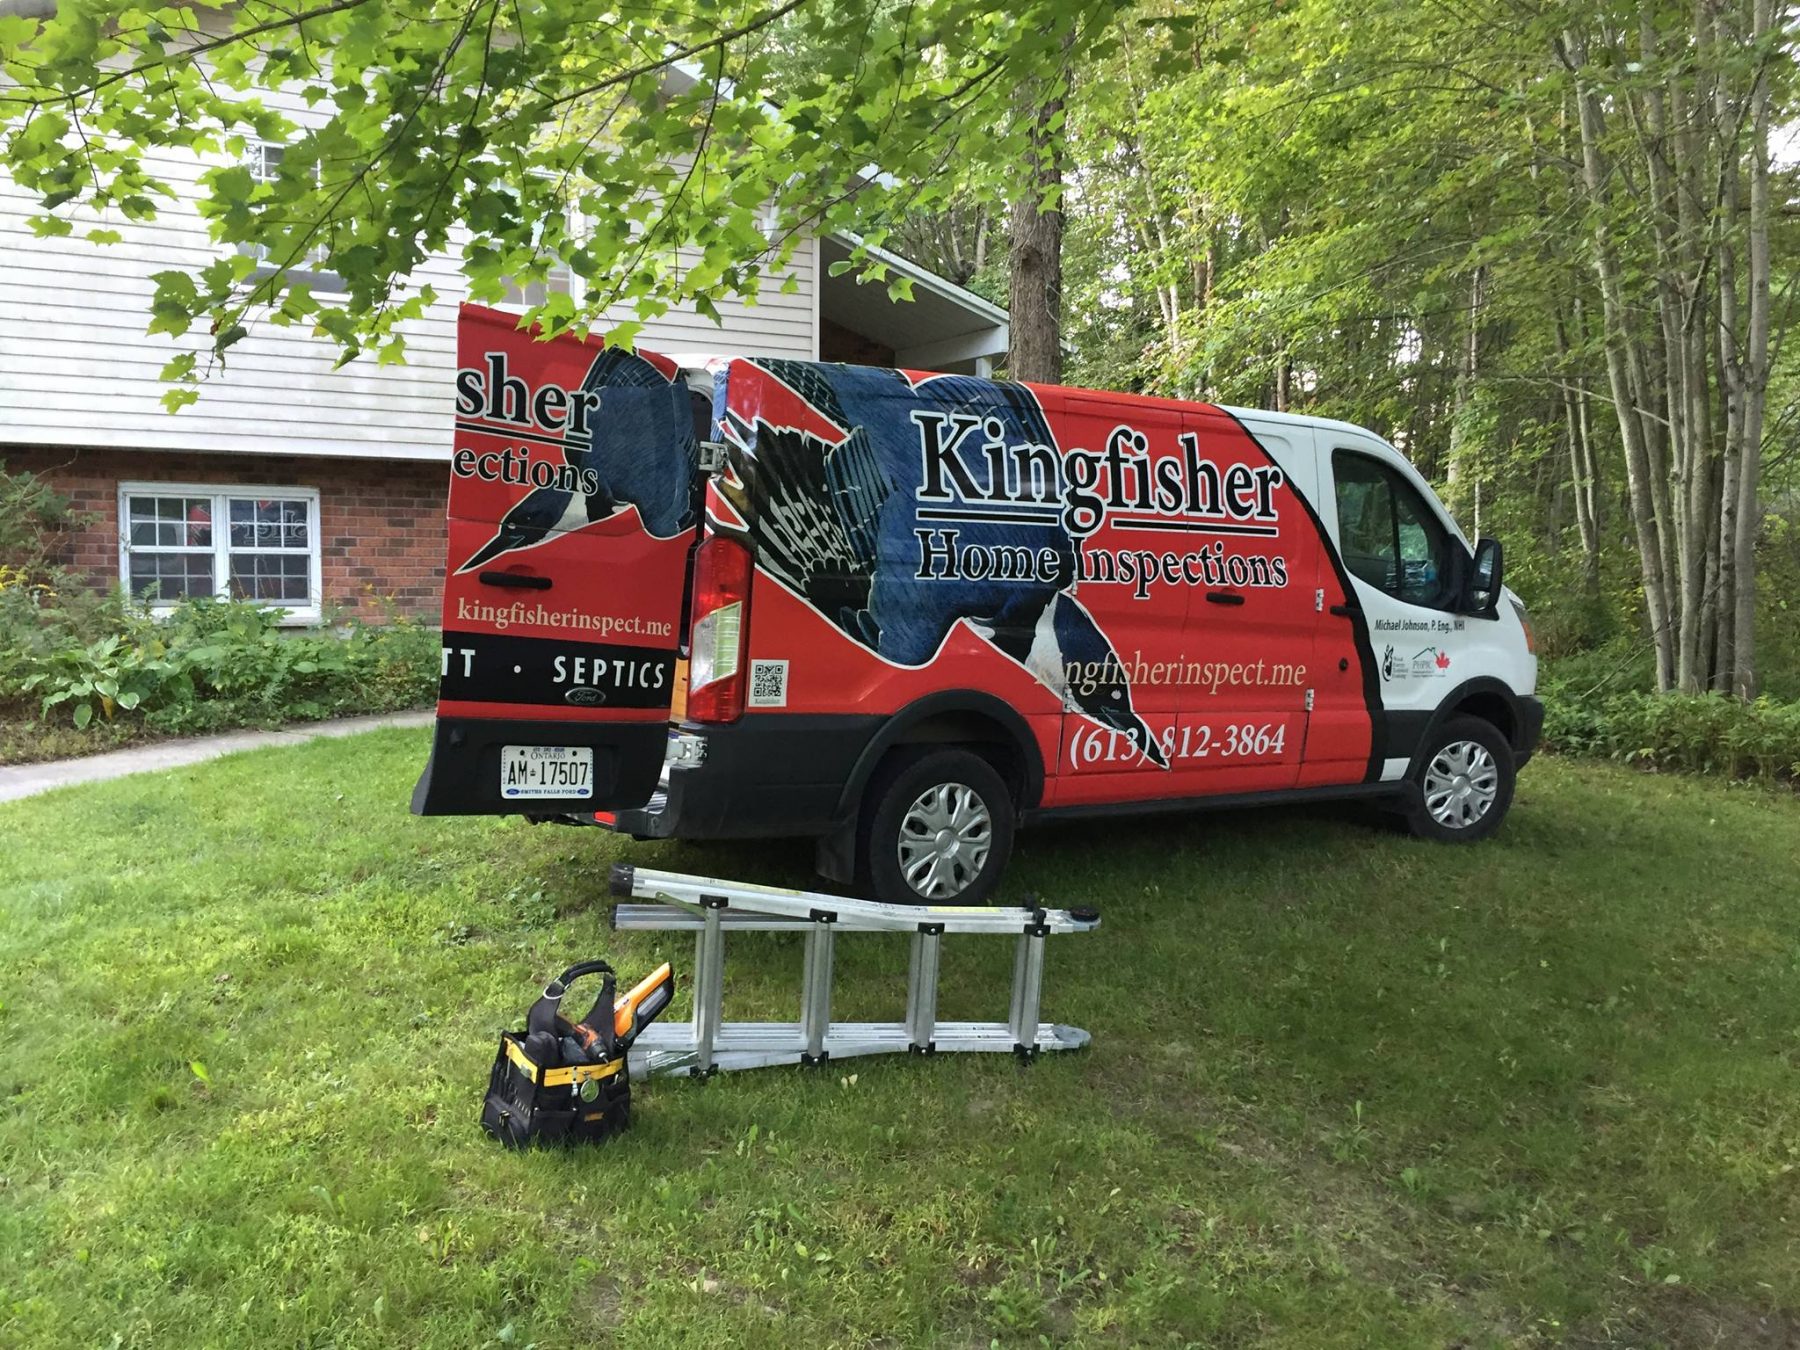 Kingfisher Inspections red, white, and blue truck alonside a ladder and toolbox